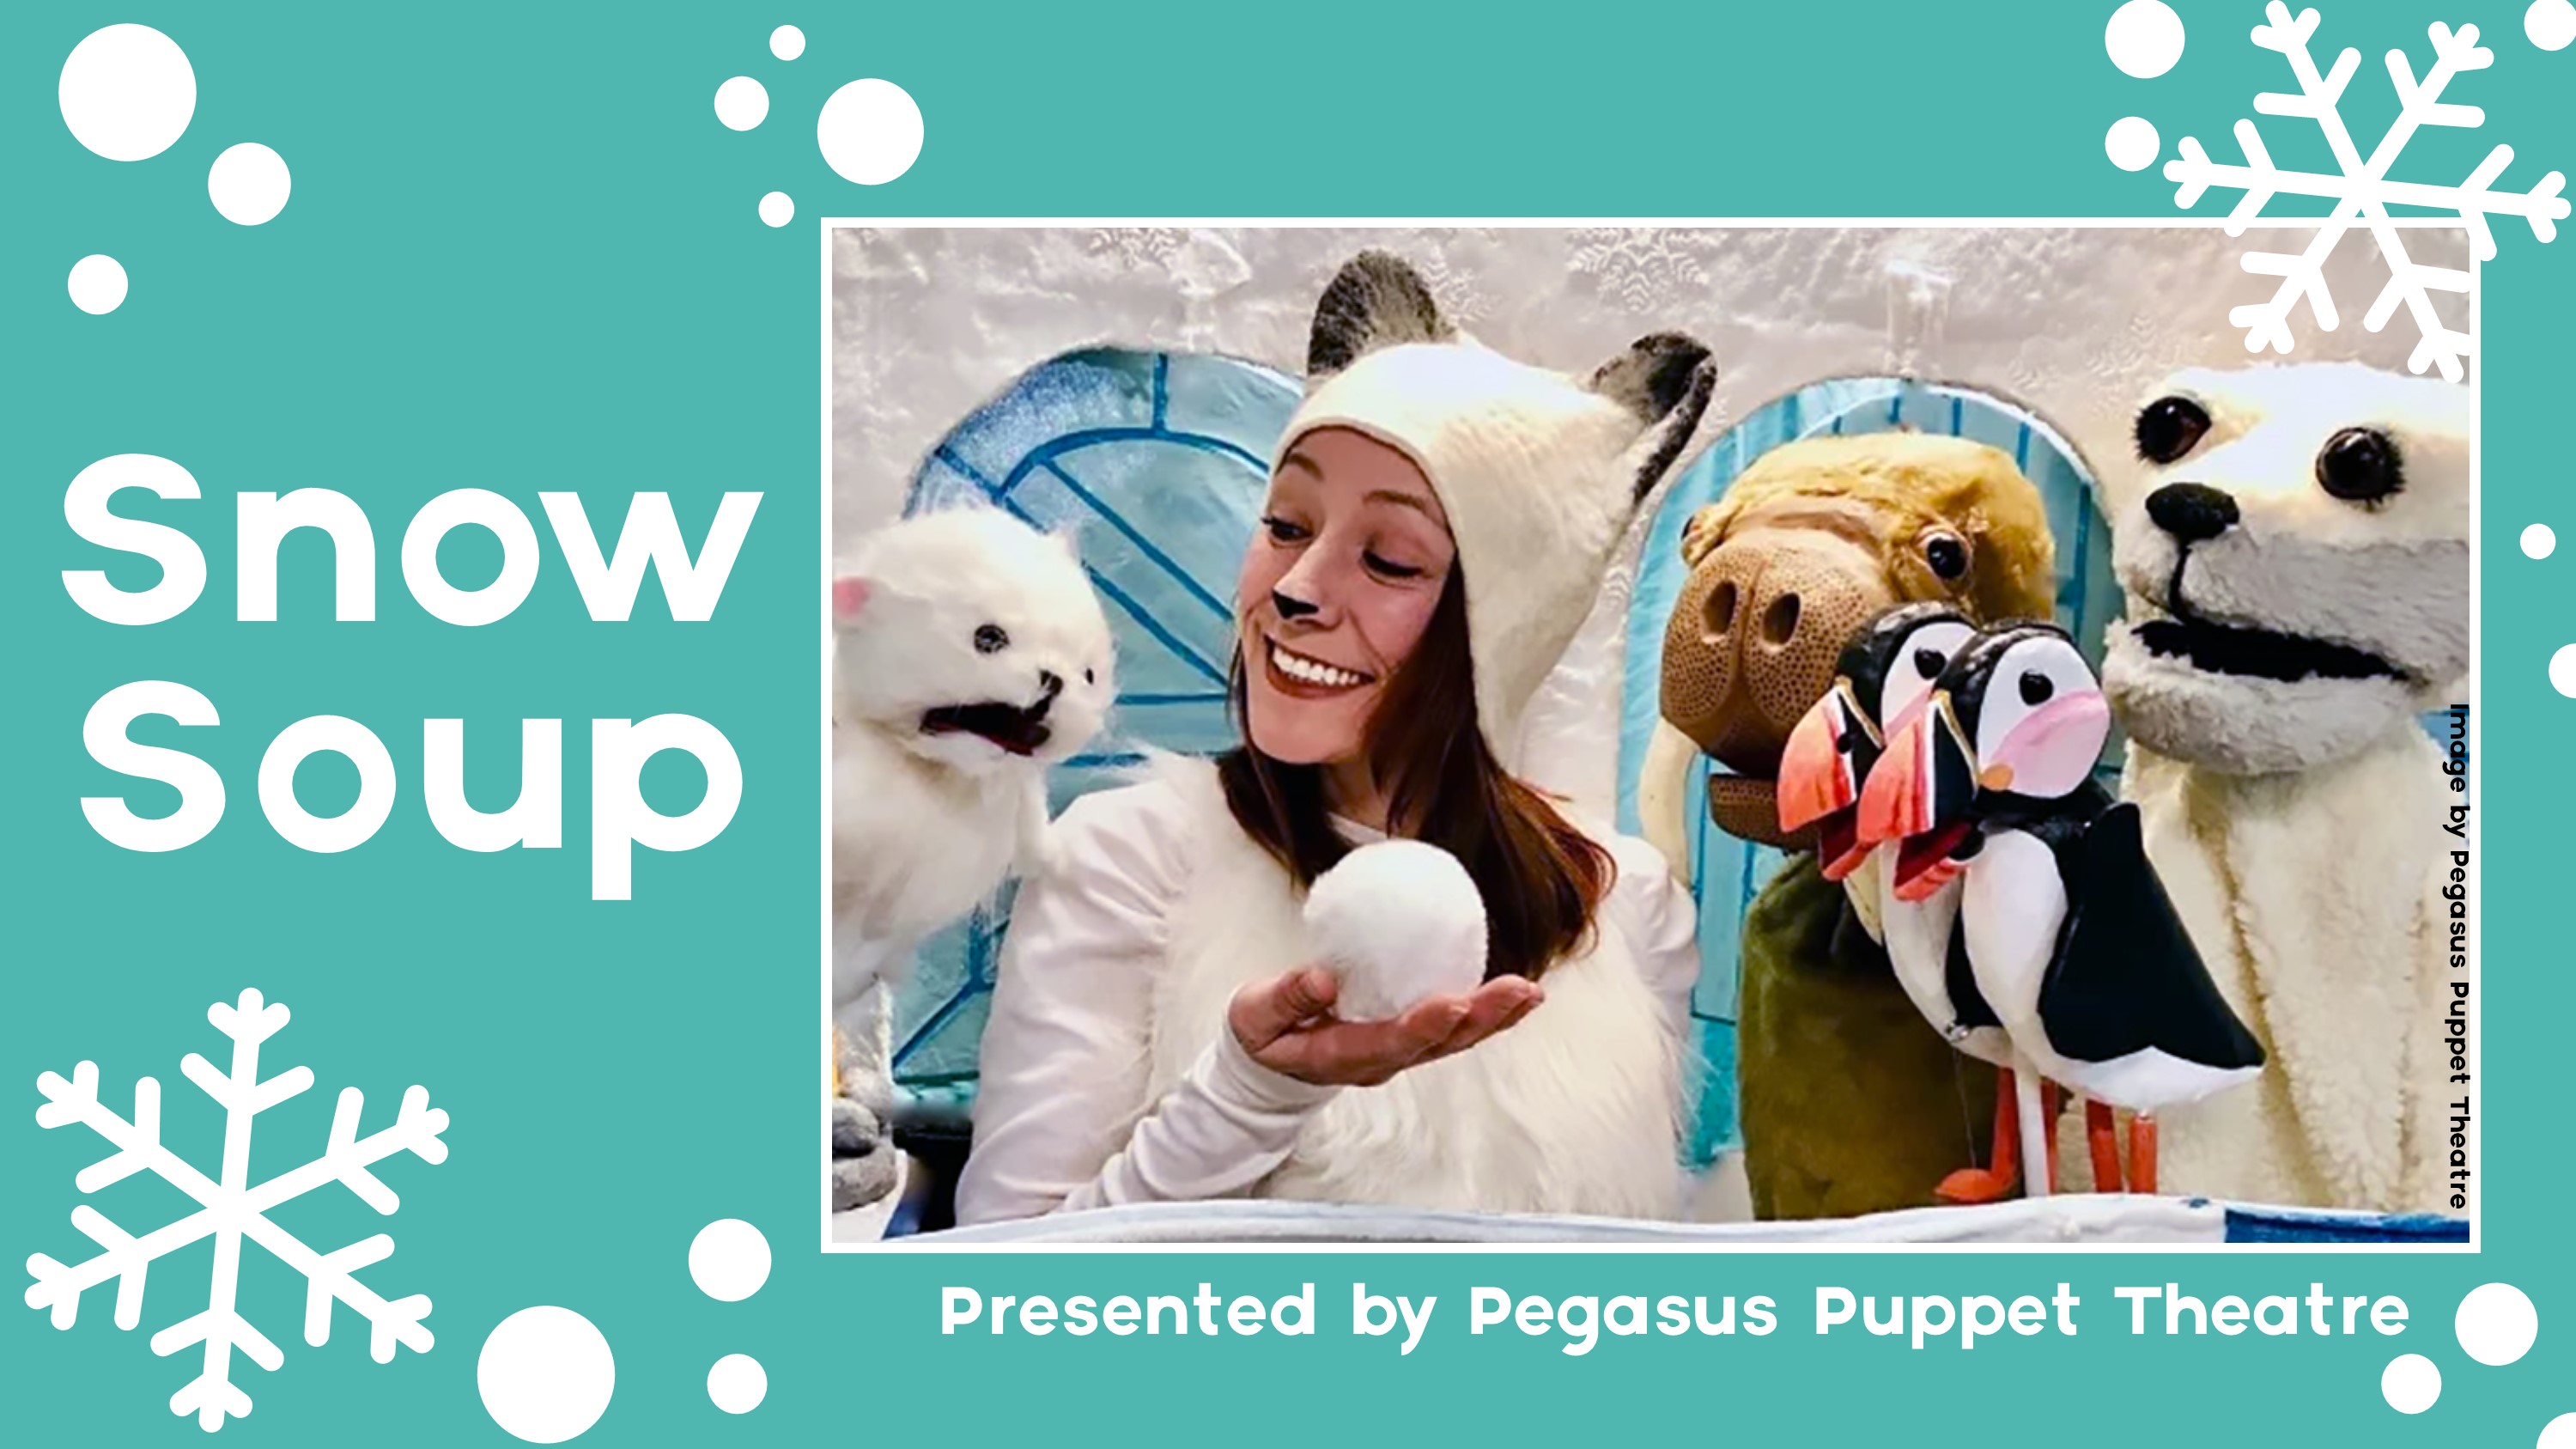 Photo of performer and animal puppets, with snowflakes in the background and text that says "Snow Soup"